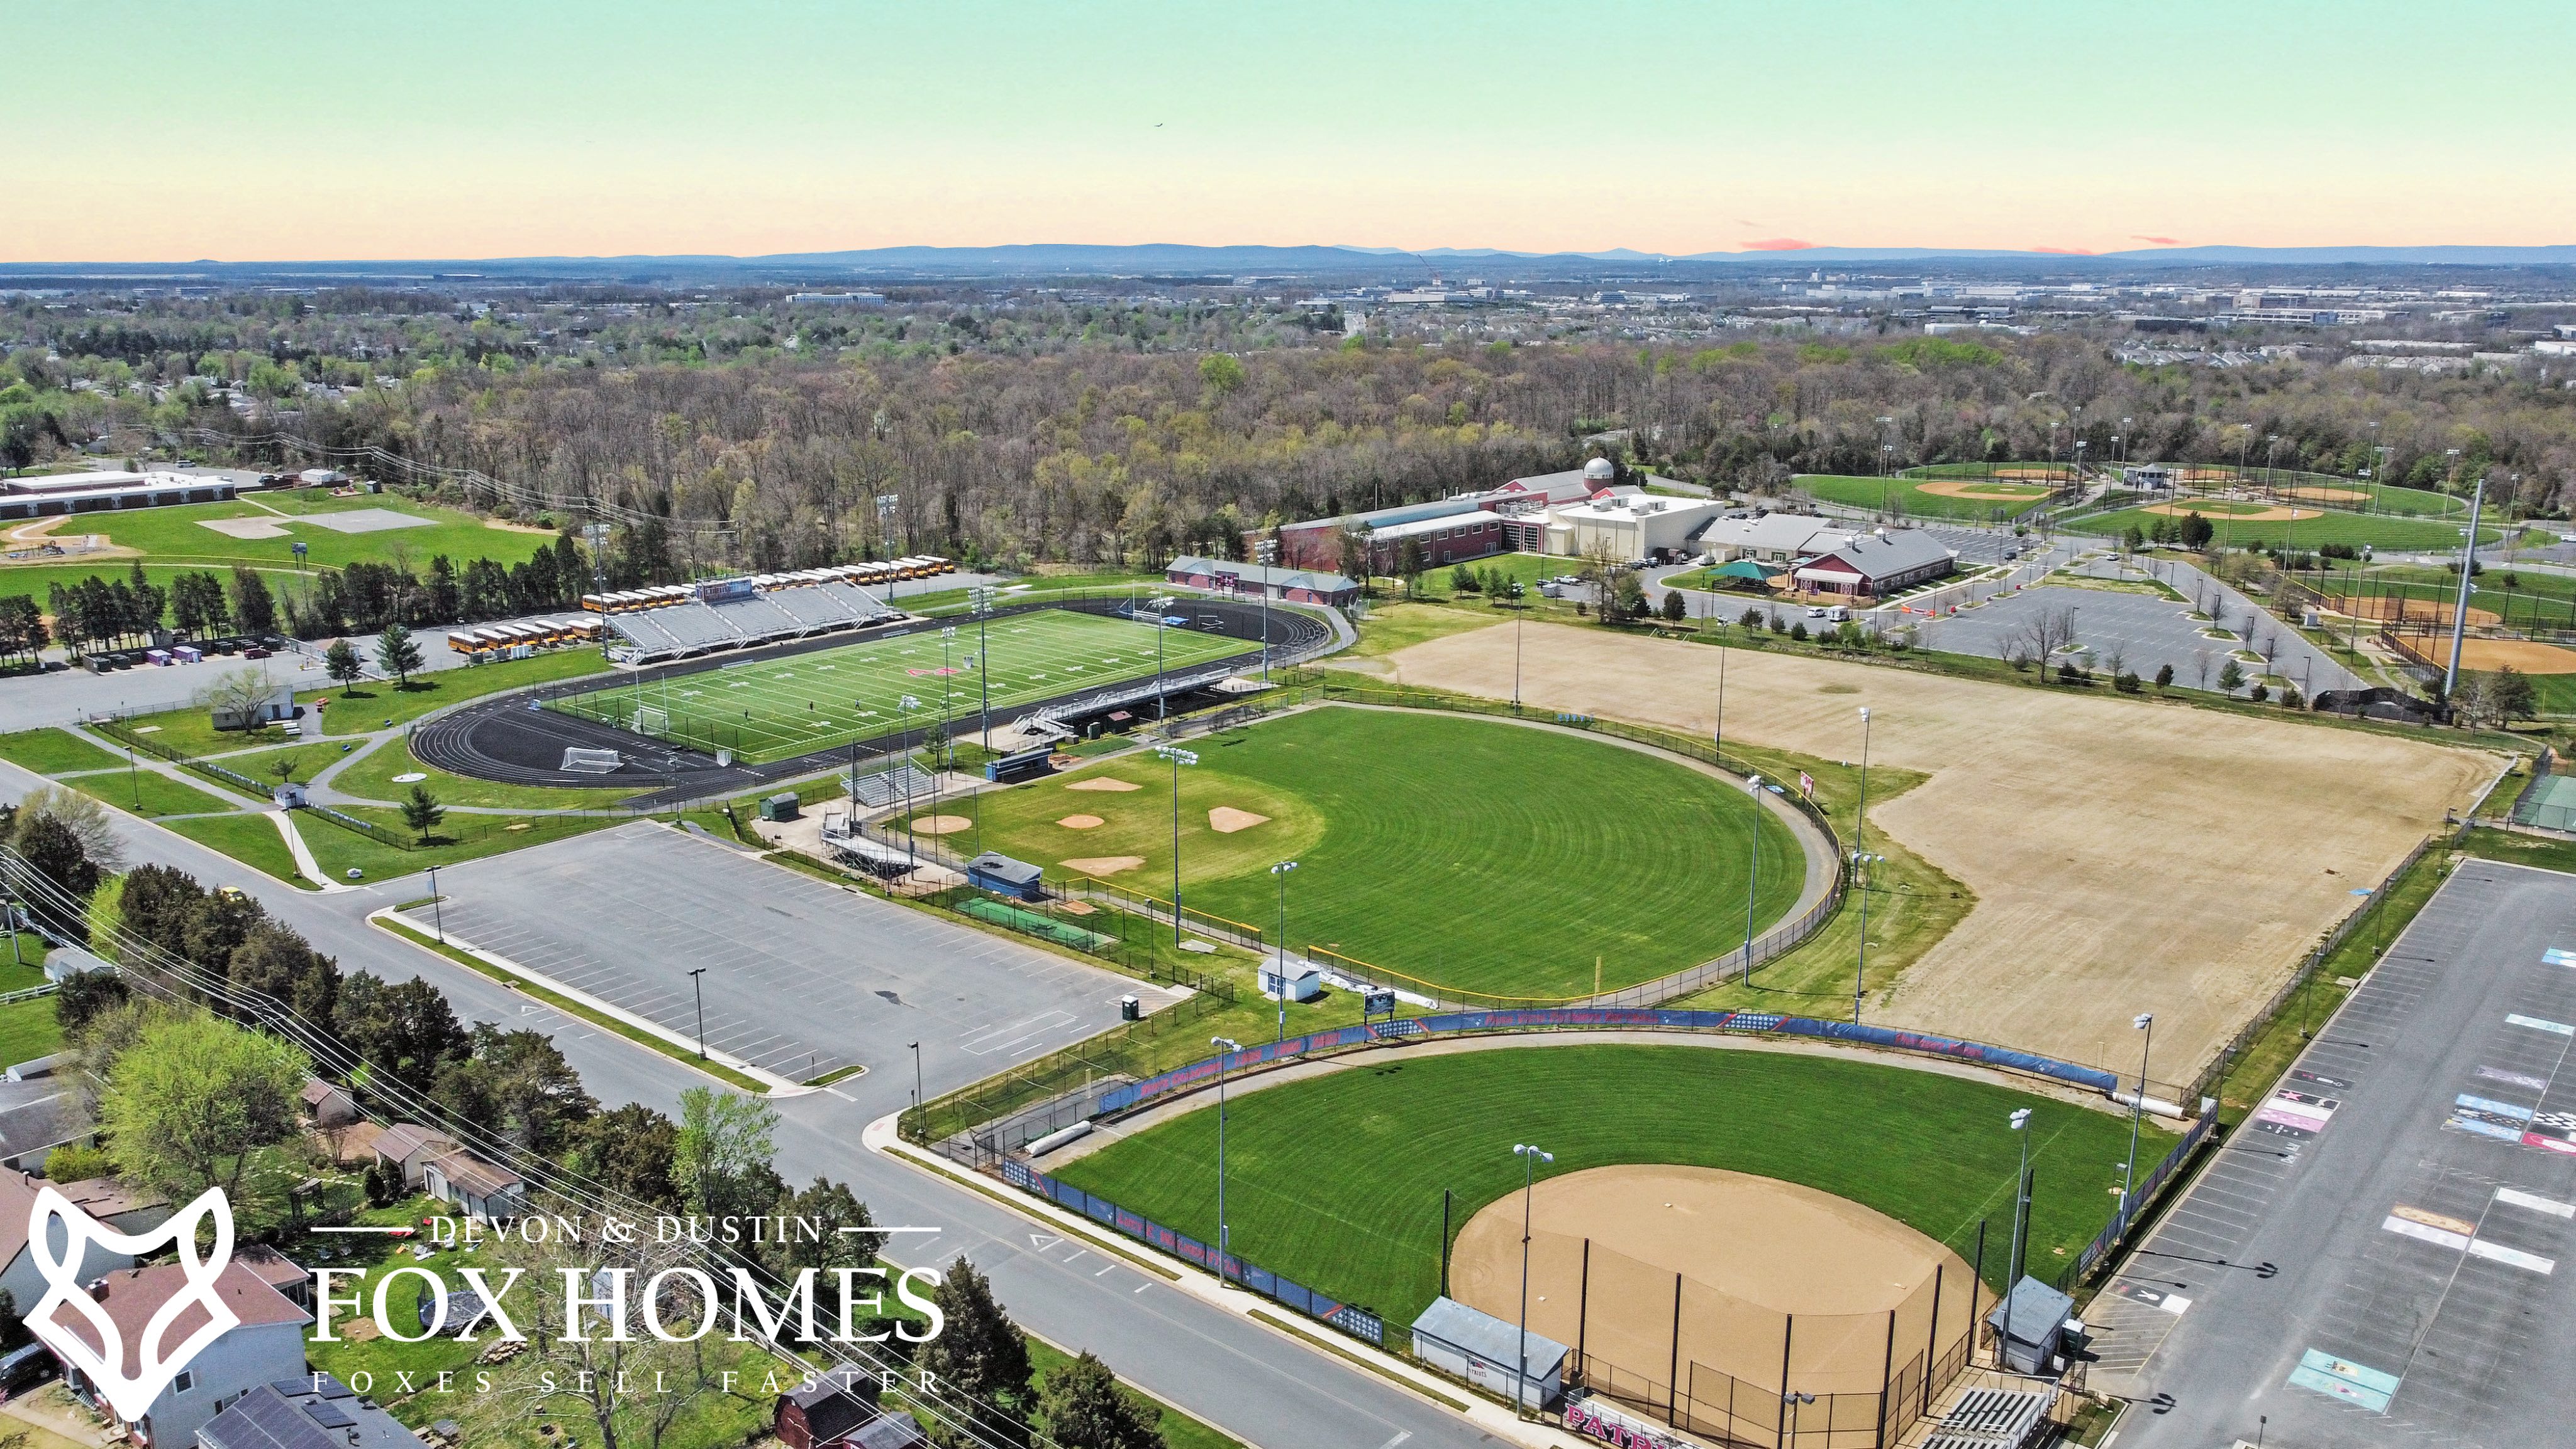 Homes-For-Sale-In-Park-View-High-School-District-Devon-and-Dustin-Fox-Fox-Homes-Team-School-Campus-View